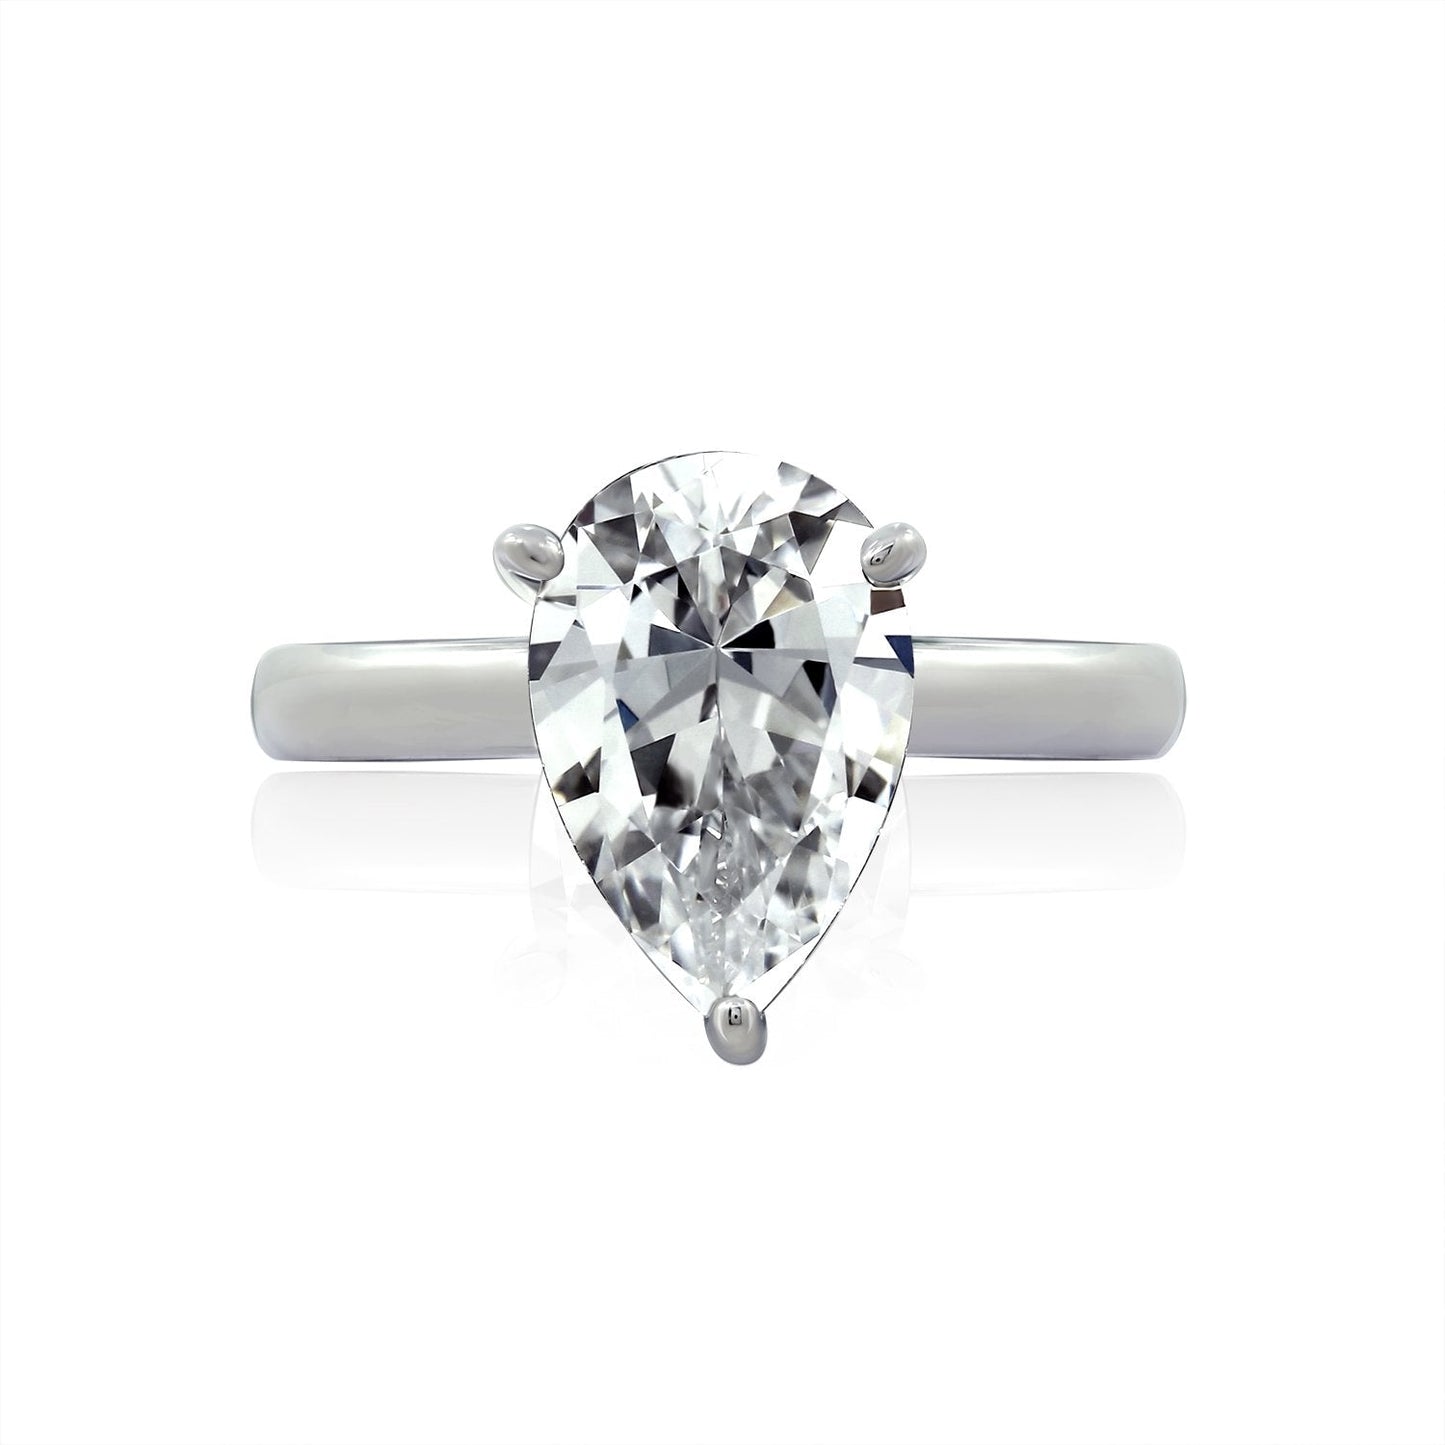 2ct Solitaire Pear Cocktail Ring JER01173